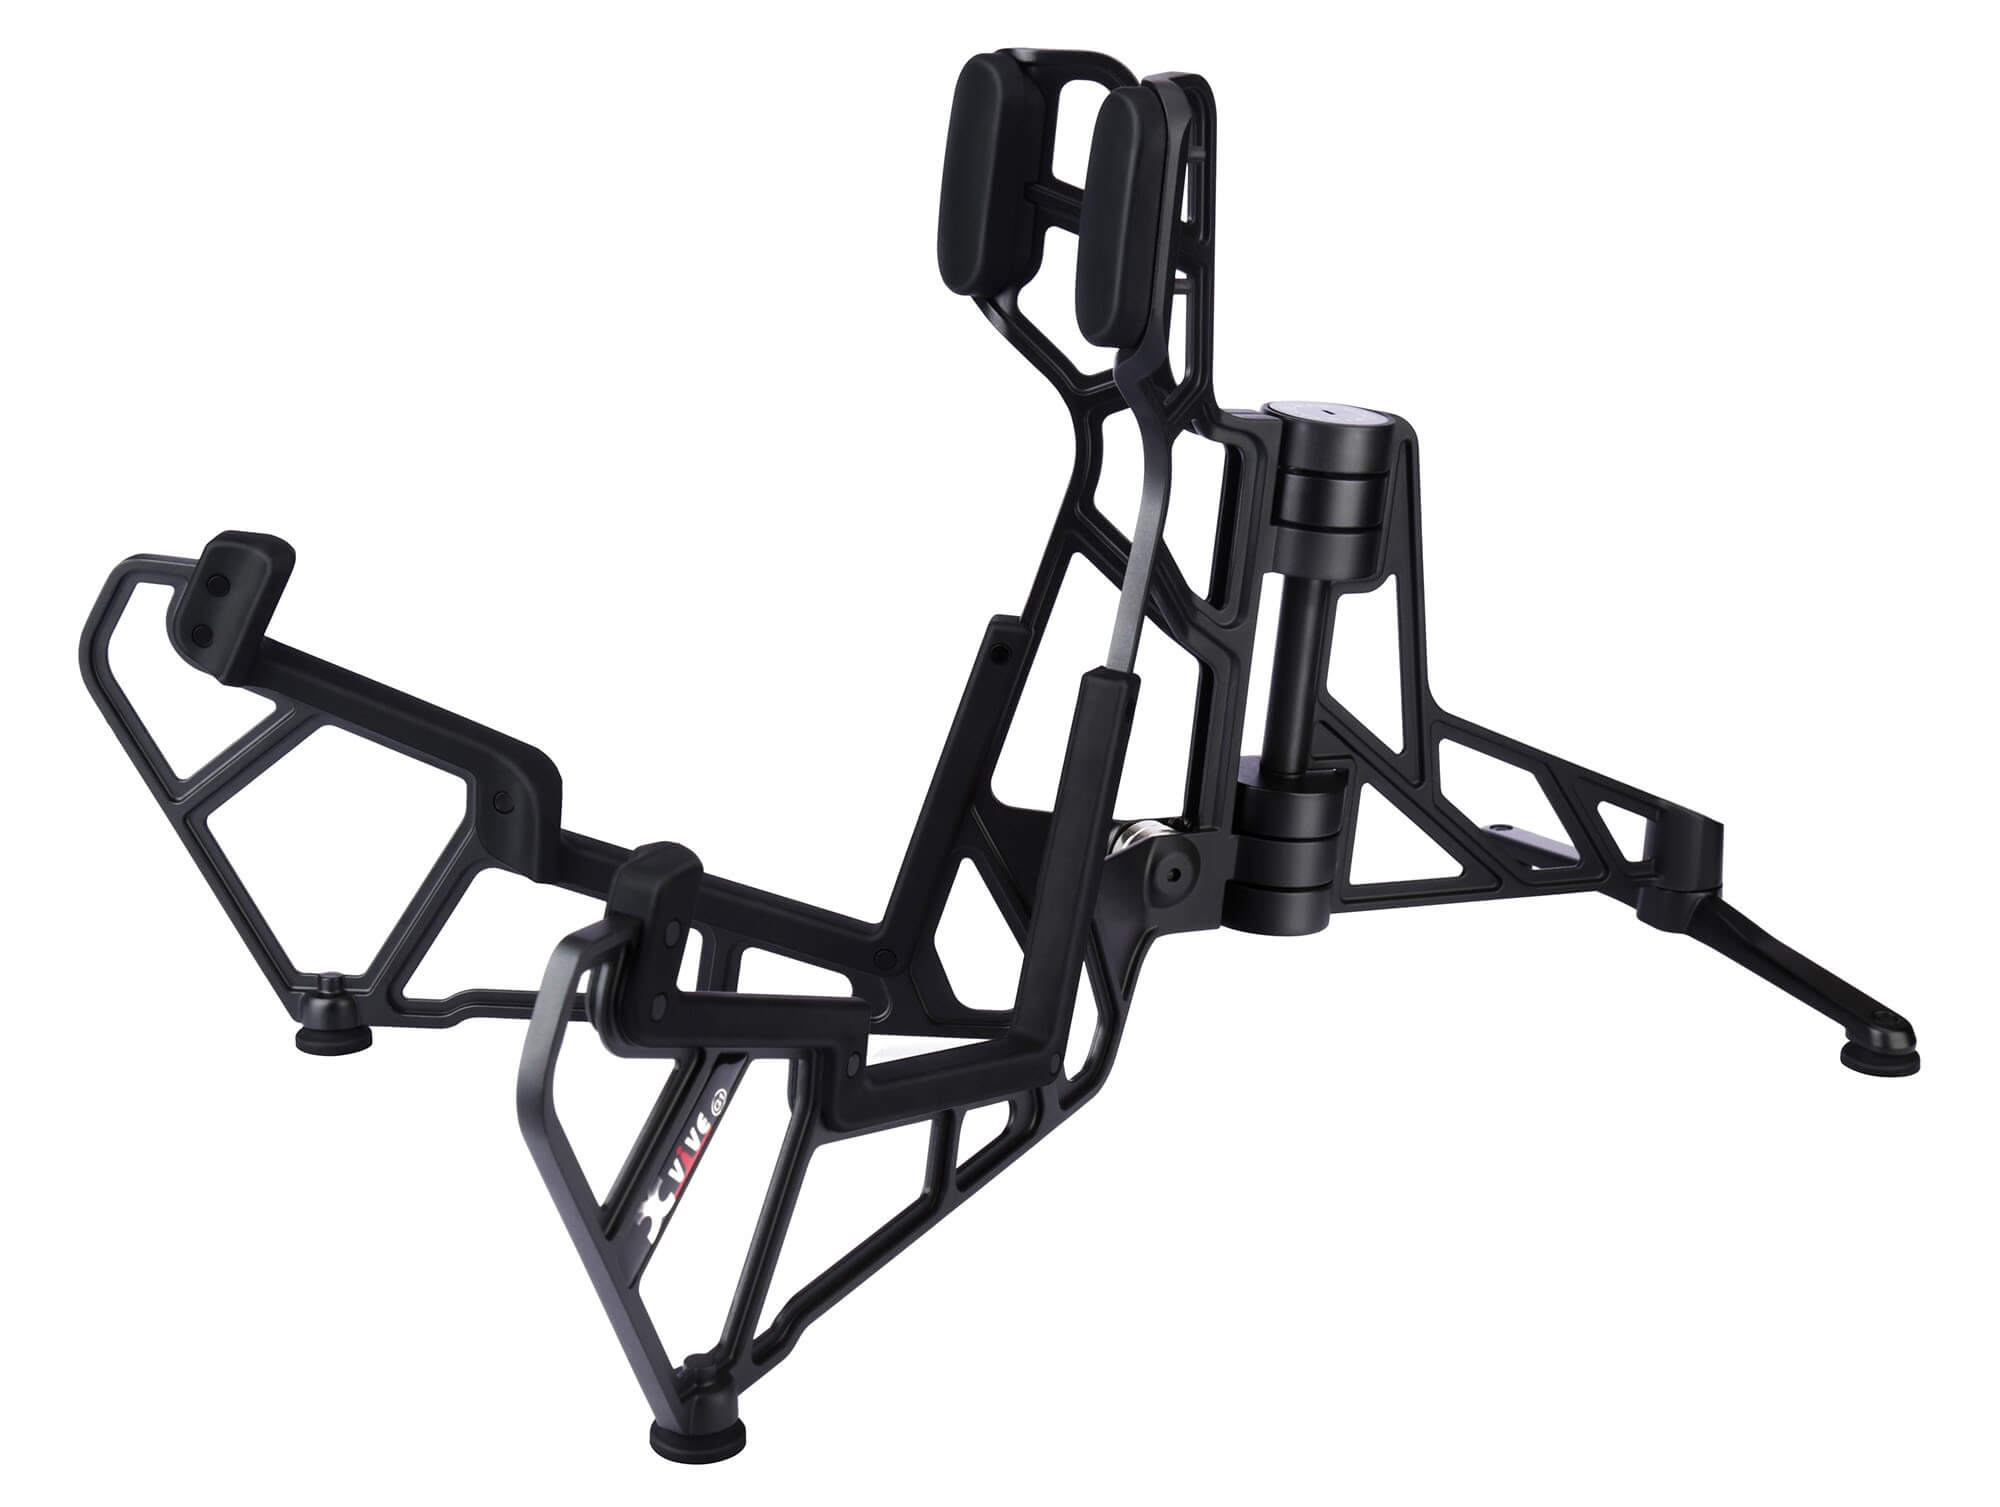 Xvive Introduces a State-of-the-Art Guitar Stand for Electric, Acoustic and Bass Guitars